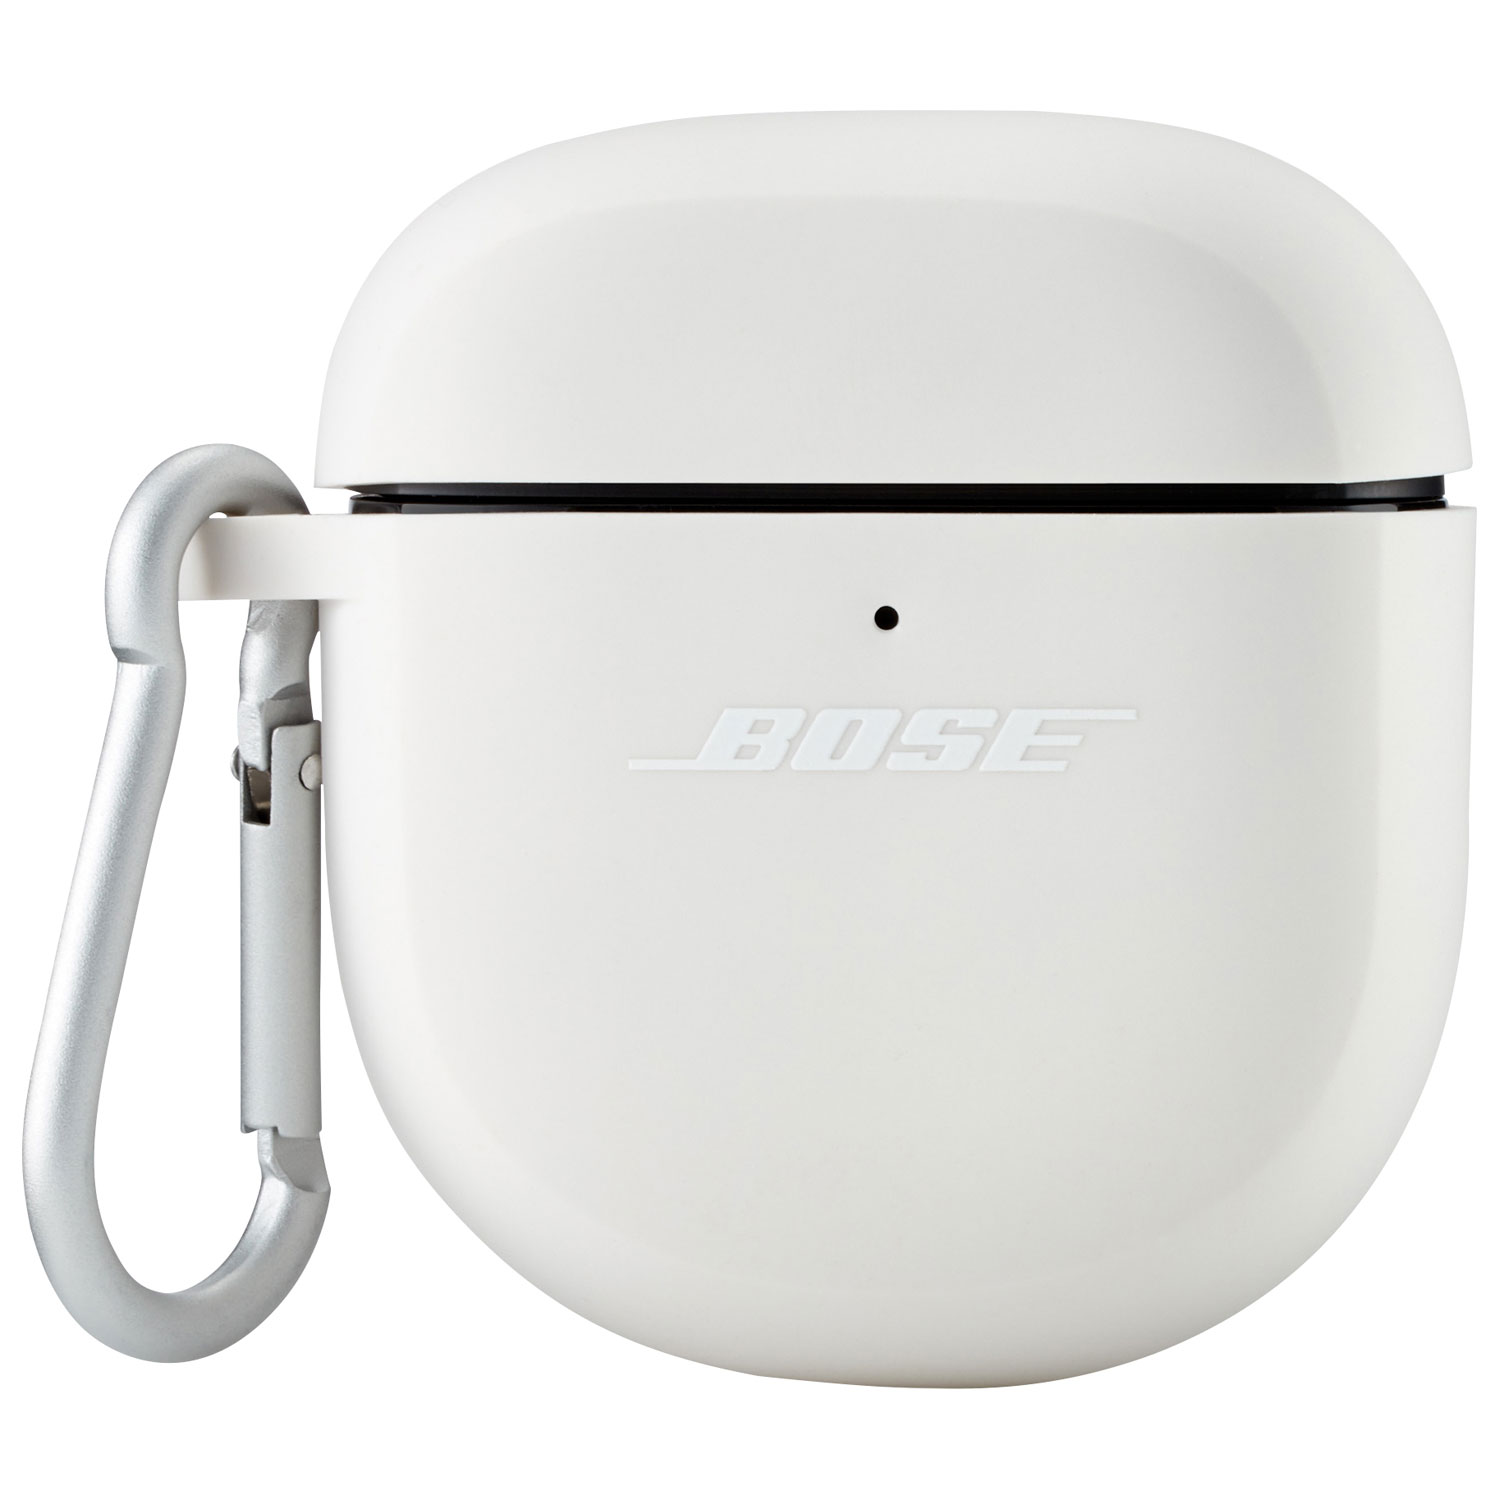 Bose Silicone Case for Bose QuietComfort Earbuds II Headphones